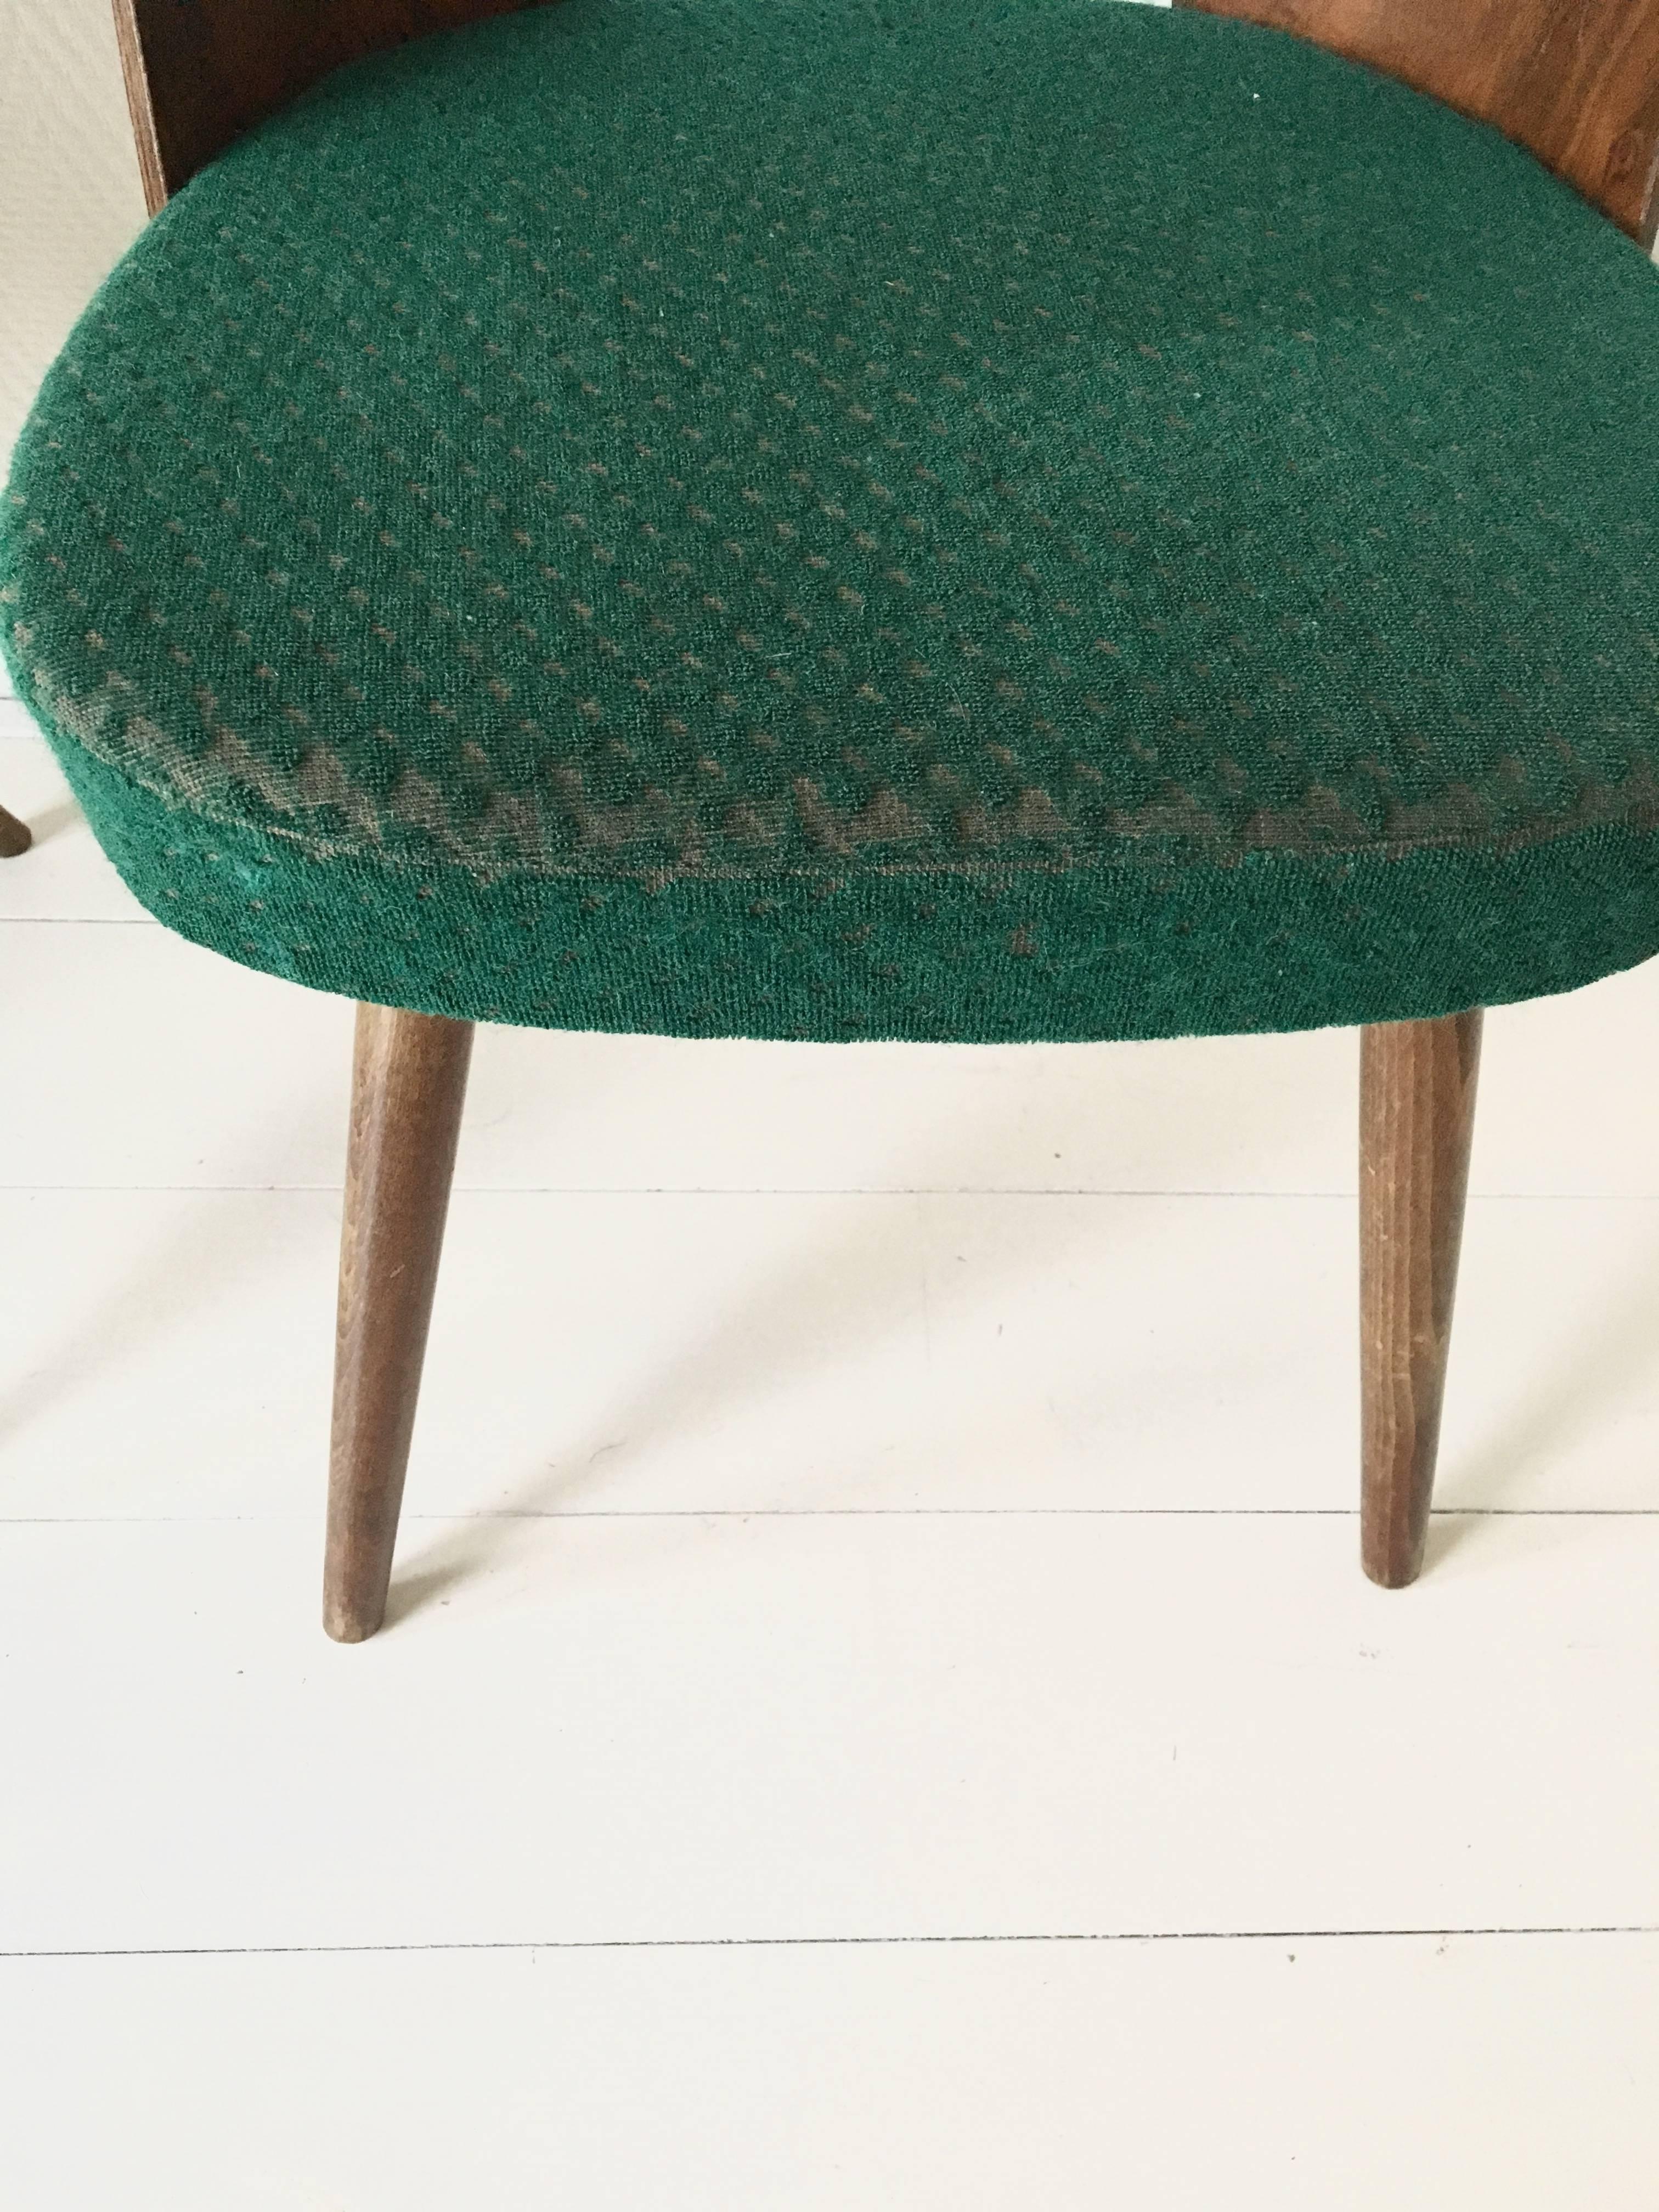 Set of Six Most Green Dining Room Chairs by Antonin Suman for Zilina. SALE! 3